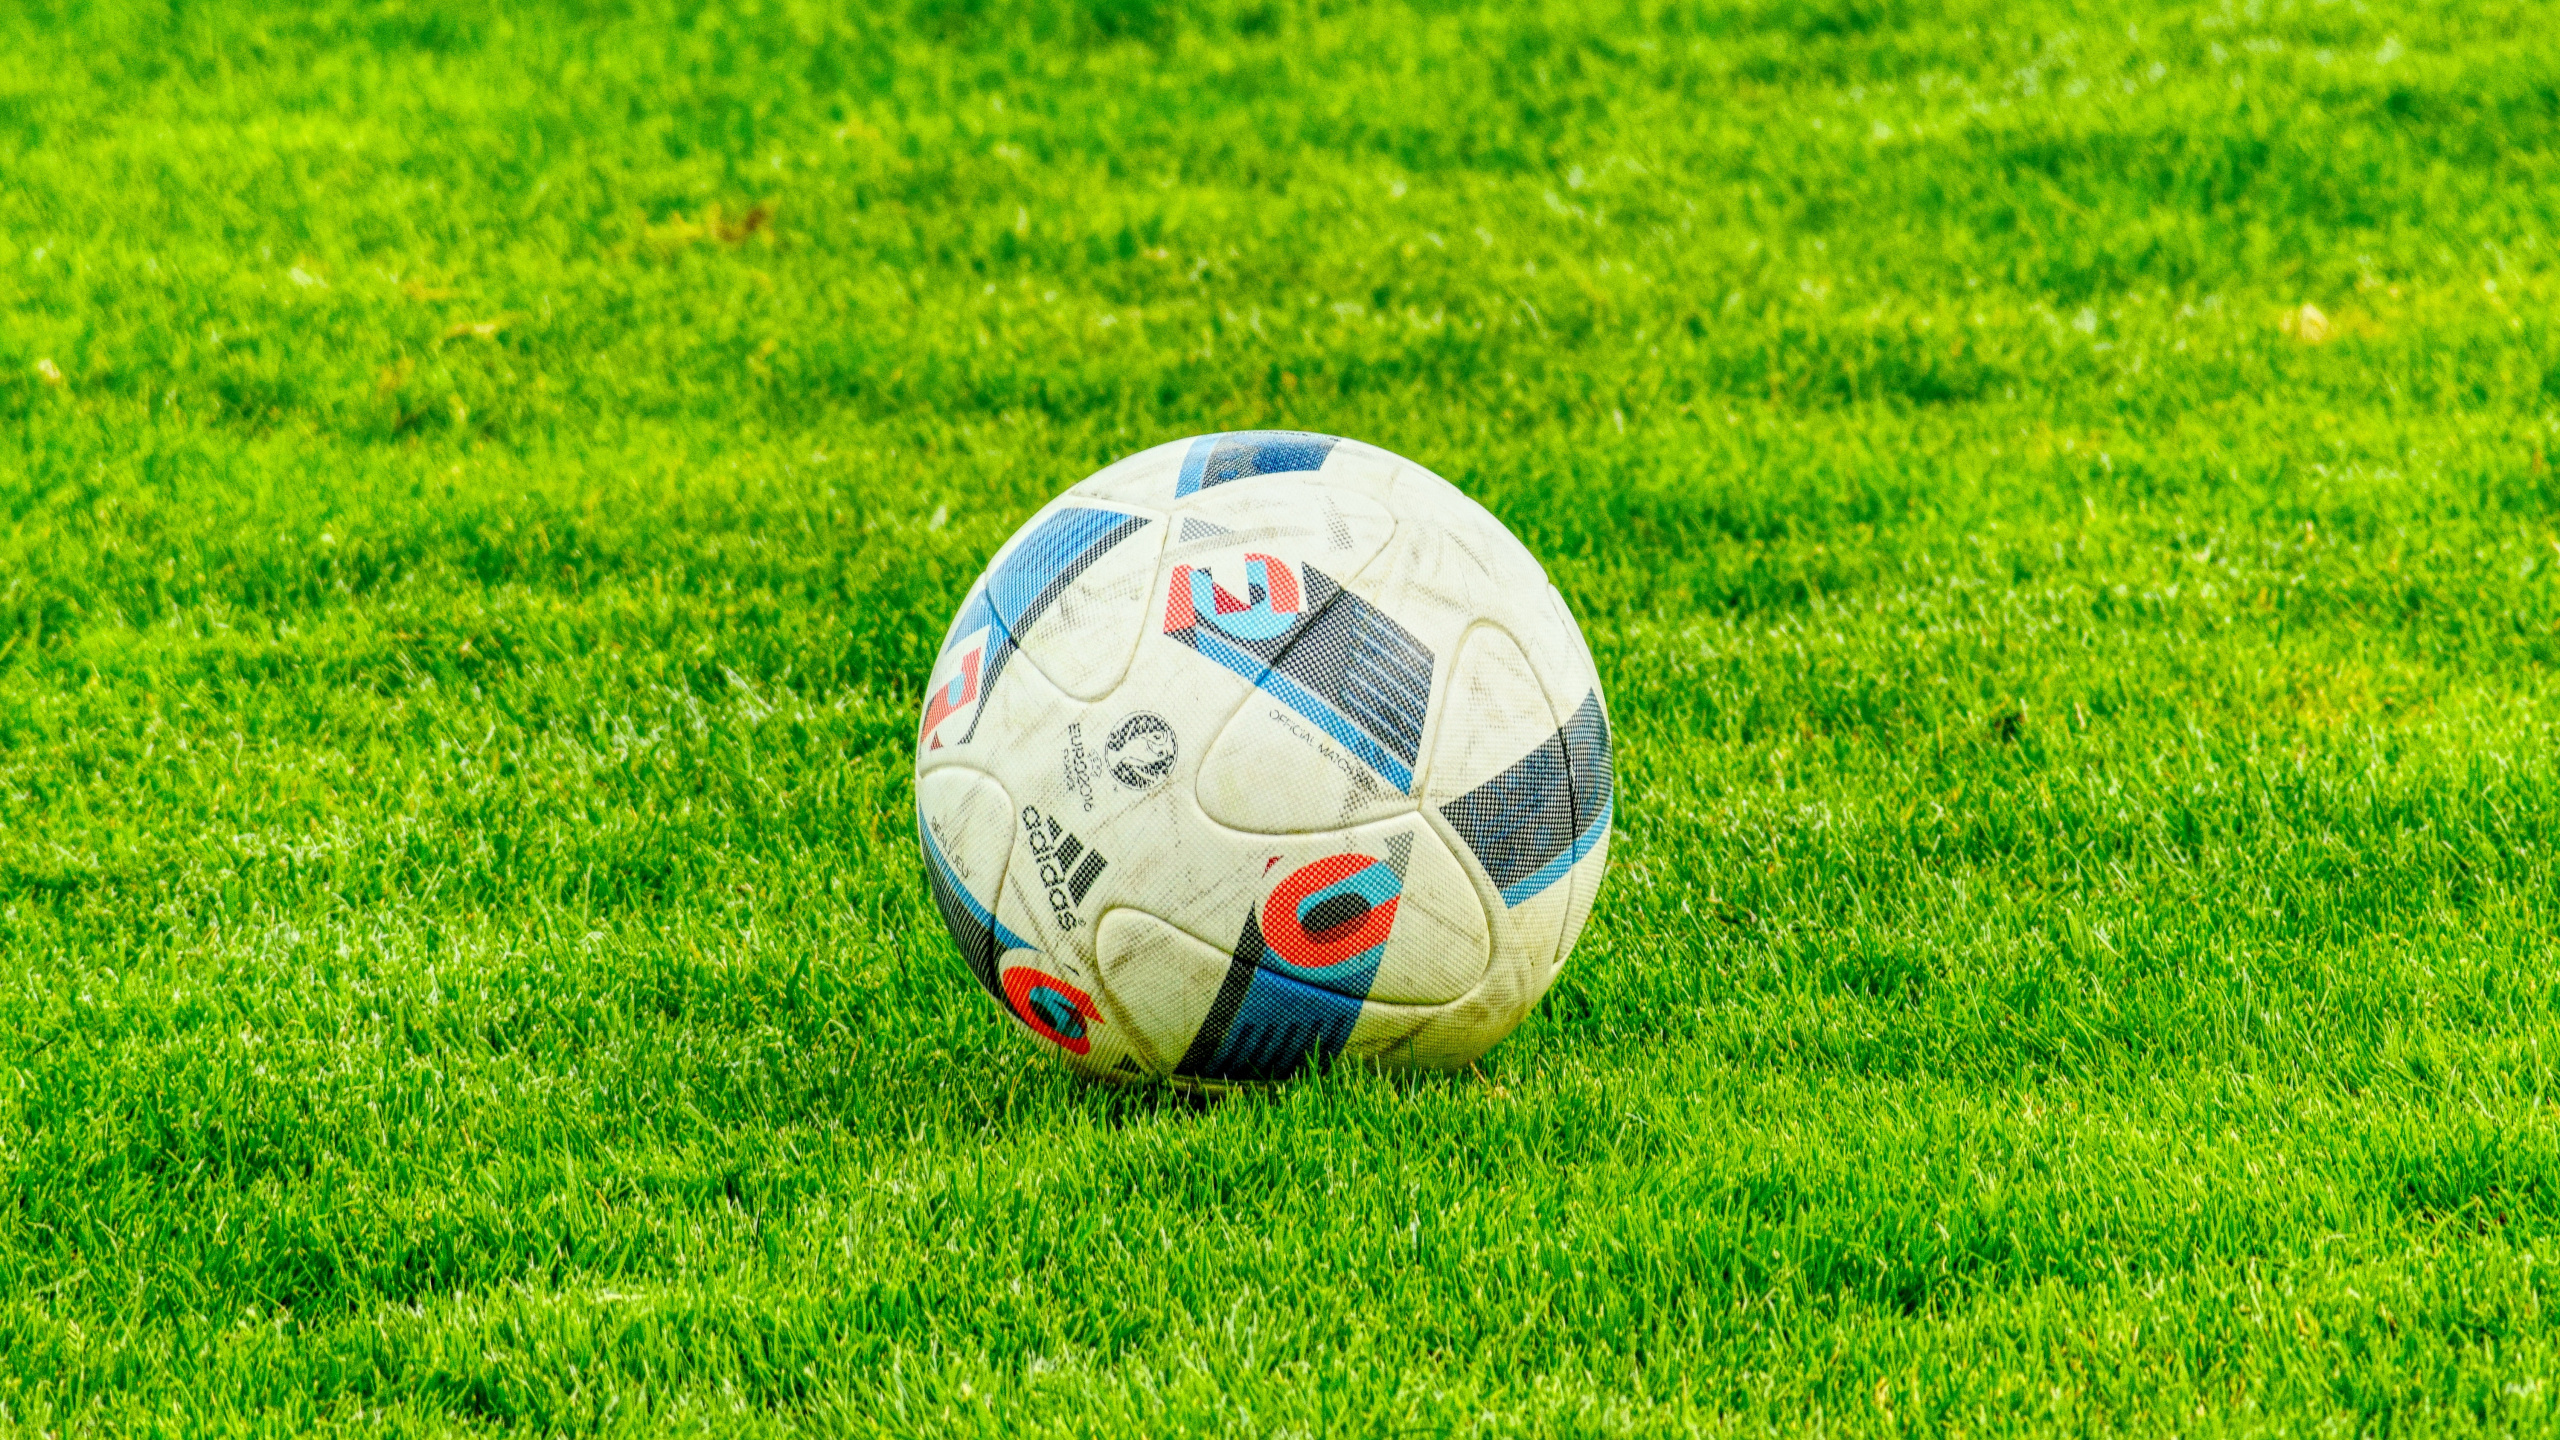 White Soccer Ball on Green Grass Field During Daytime. Wallpaper in 2560x1440 Resolution